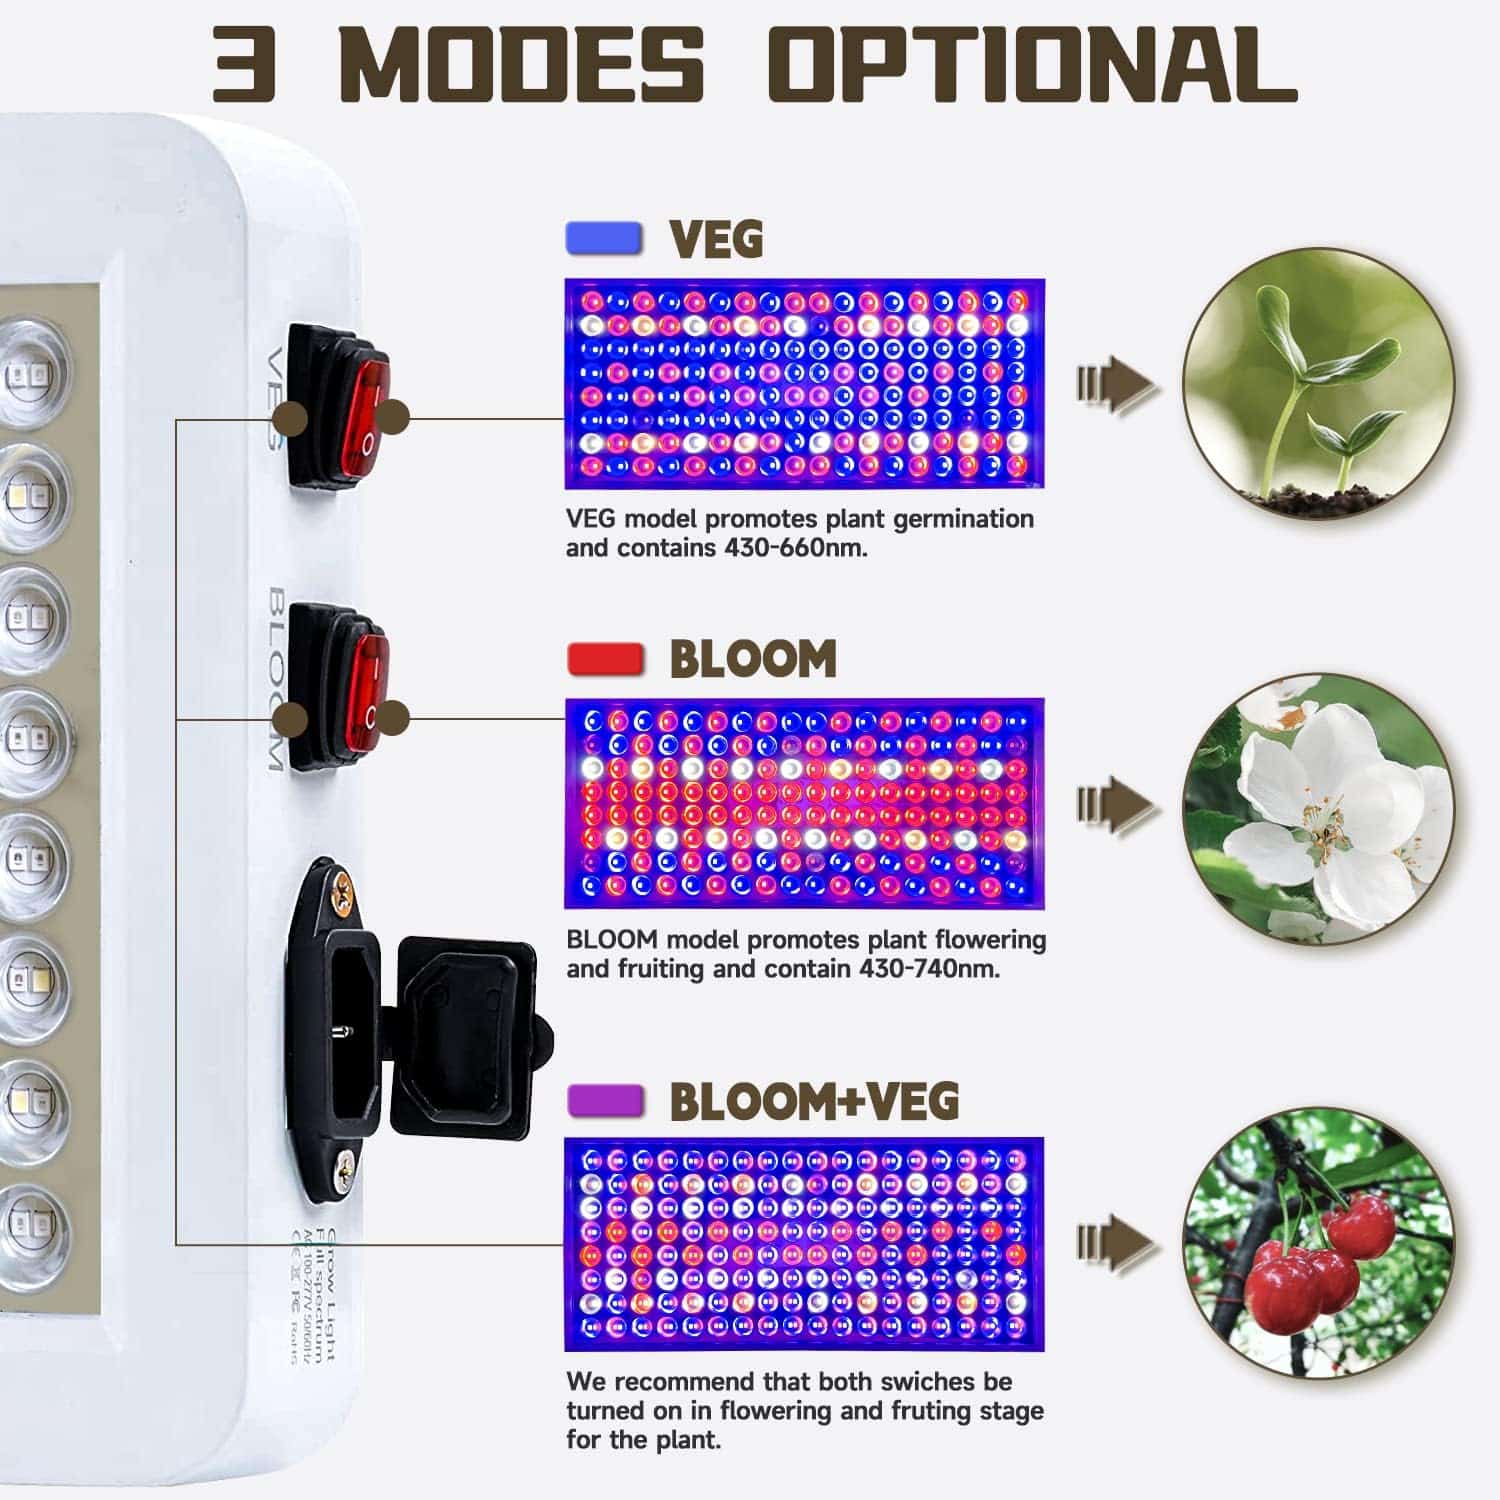 LED SERWING 1000W Grow Lights for Indoor Plants, Full Spectrum, for Seed Starting, Vegetable and Flower